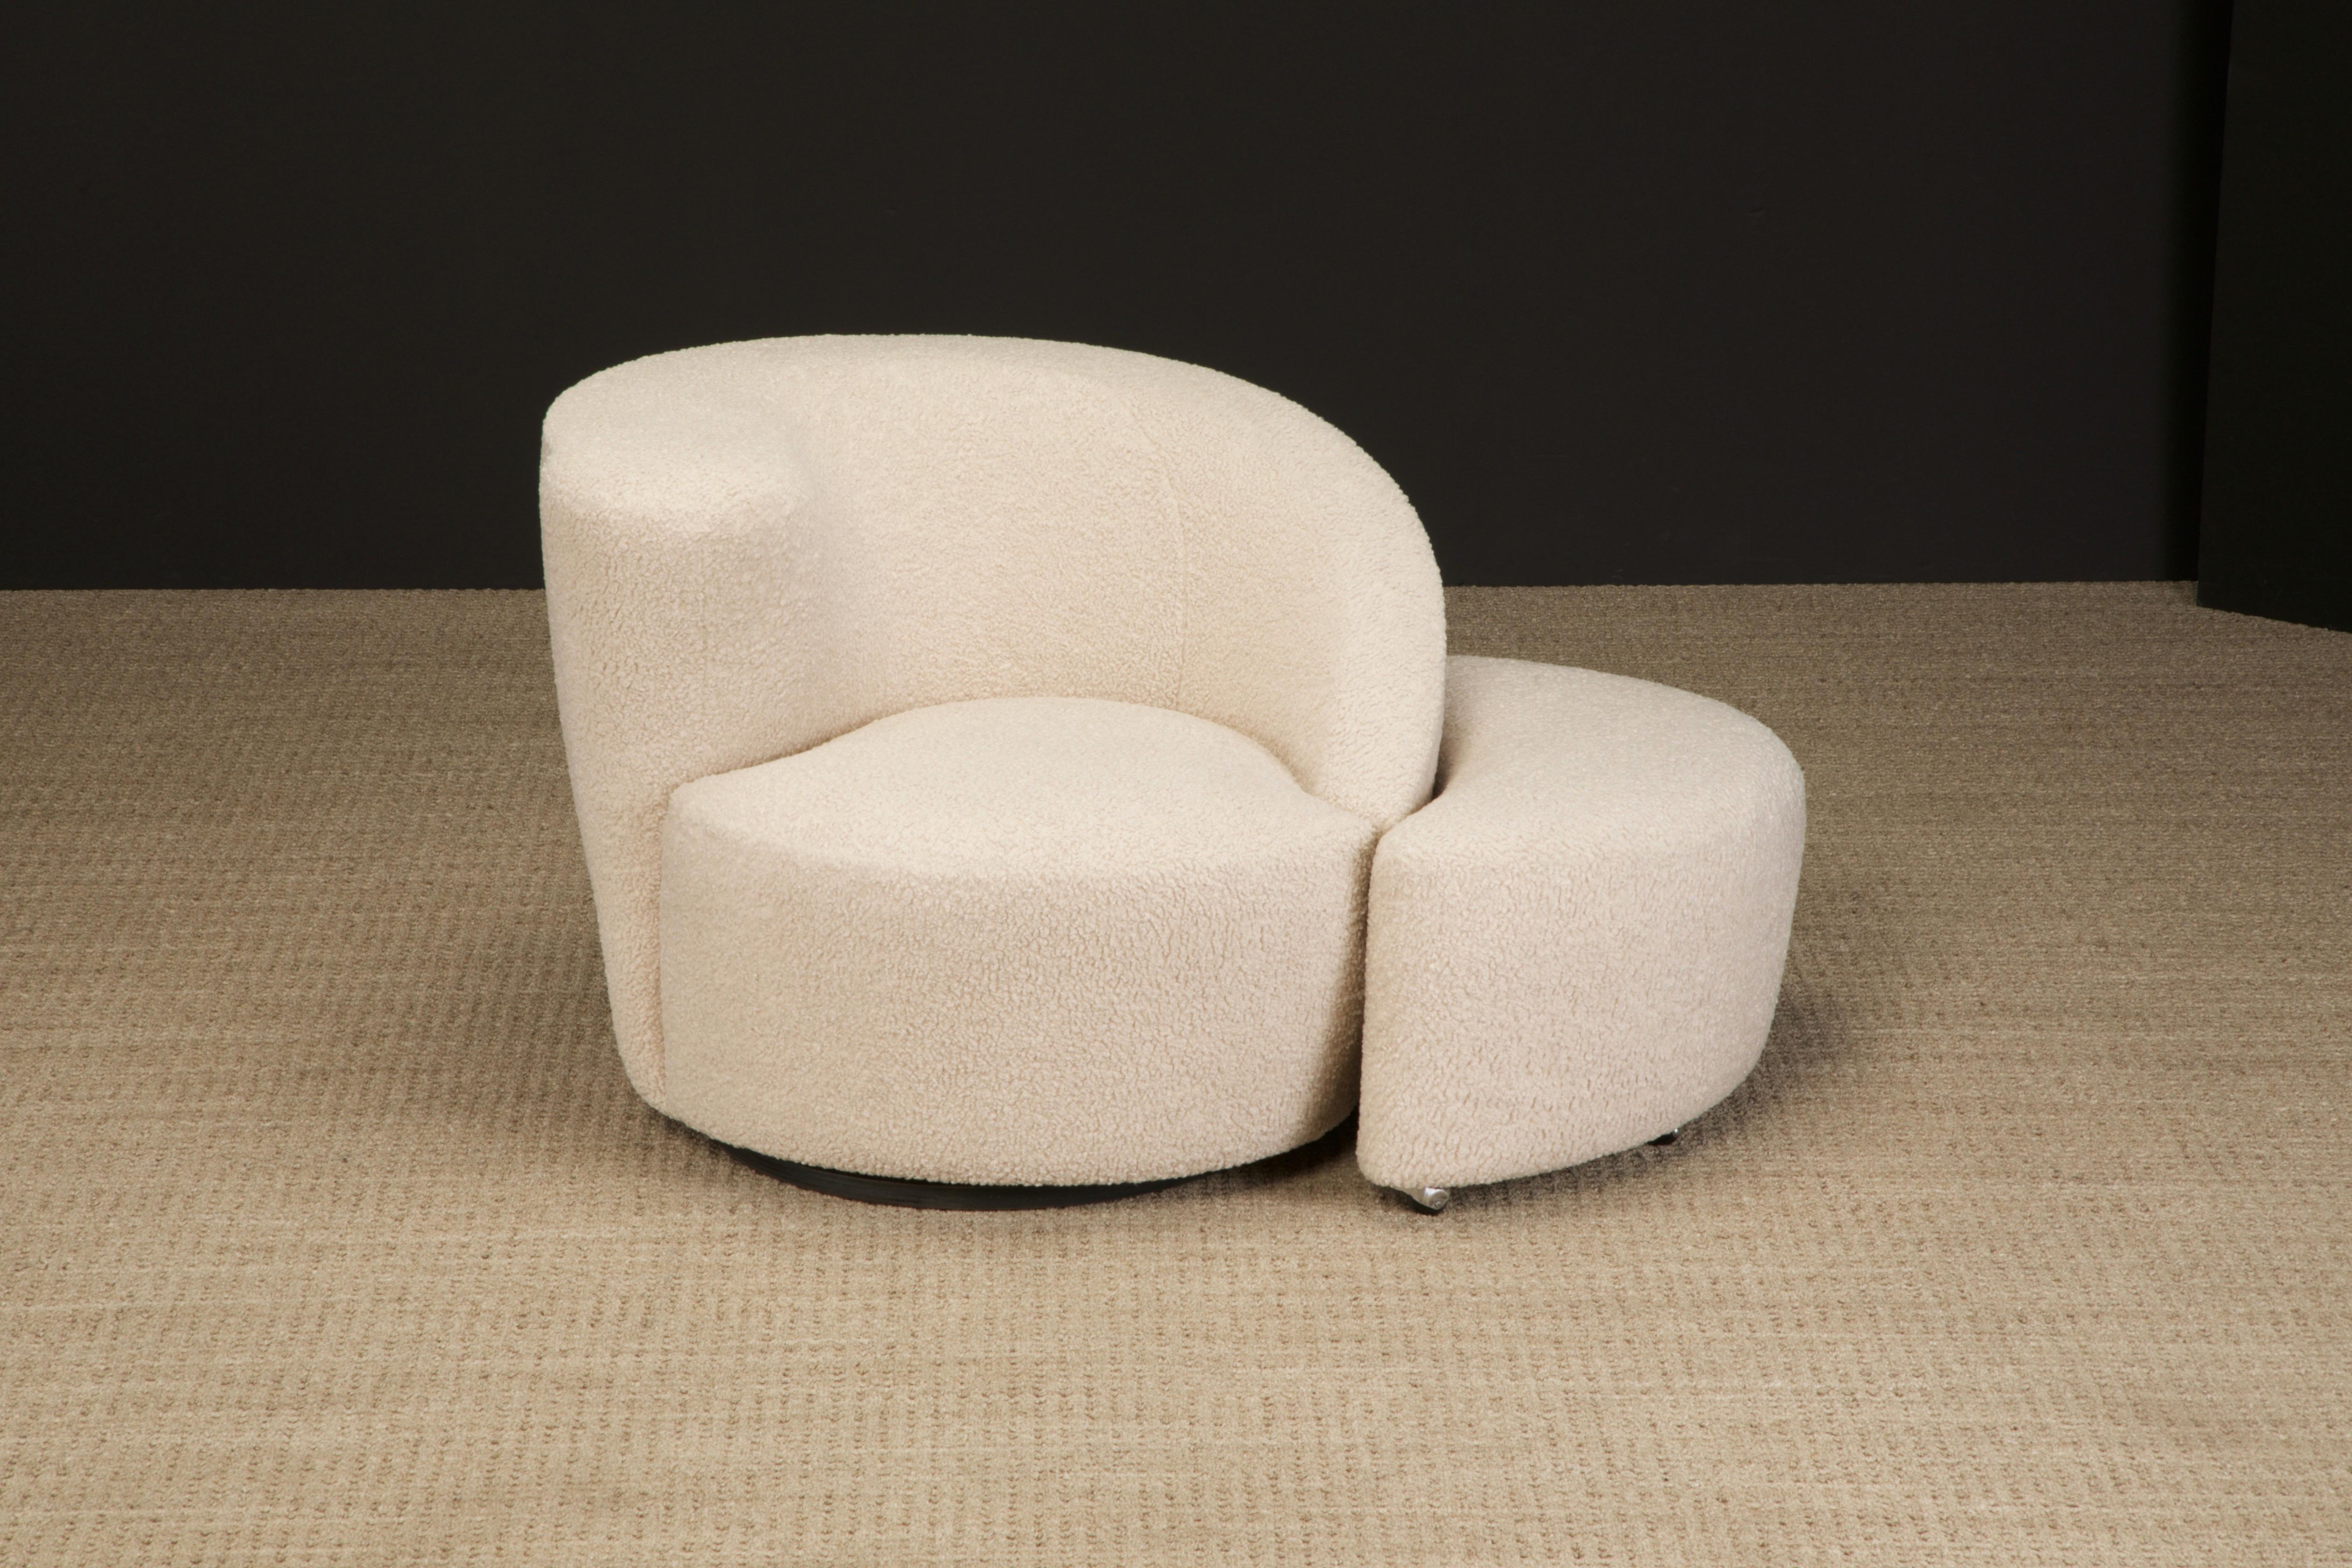 'Corkscrew' Chair & Ottoman by Vladimir Kagan for Directional in Bouclé, Signed 1